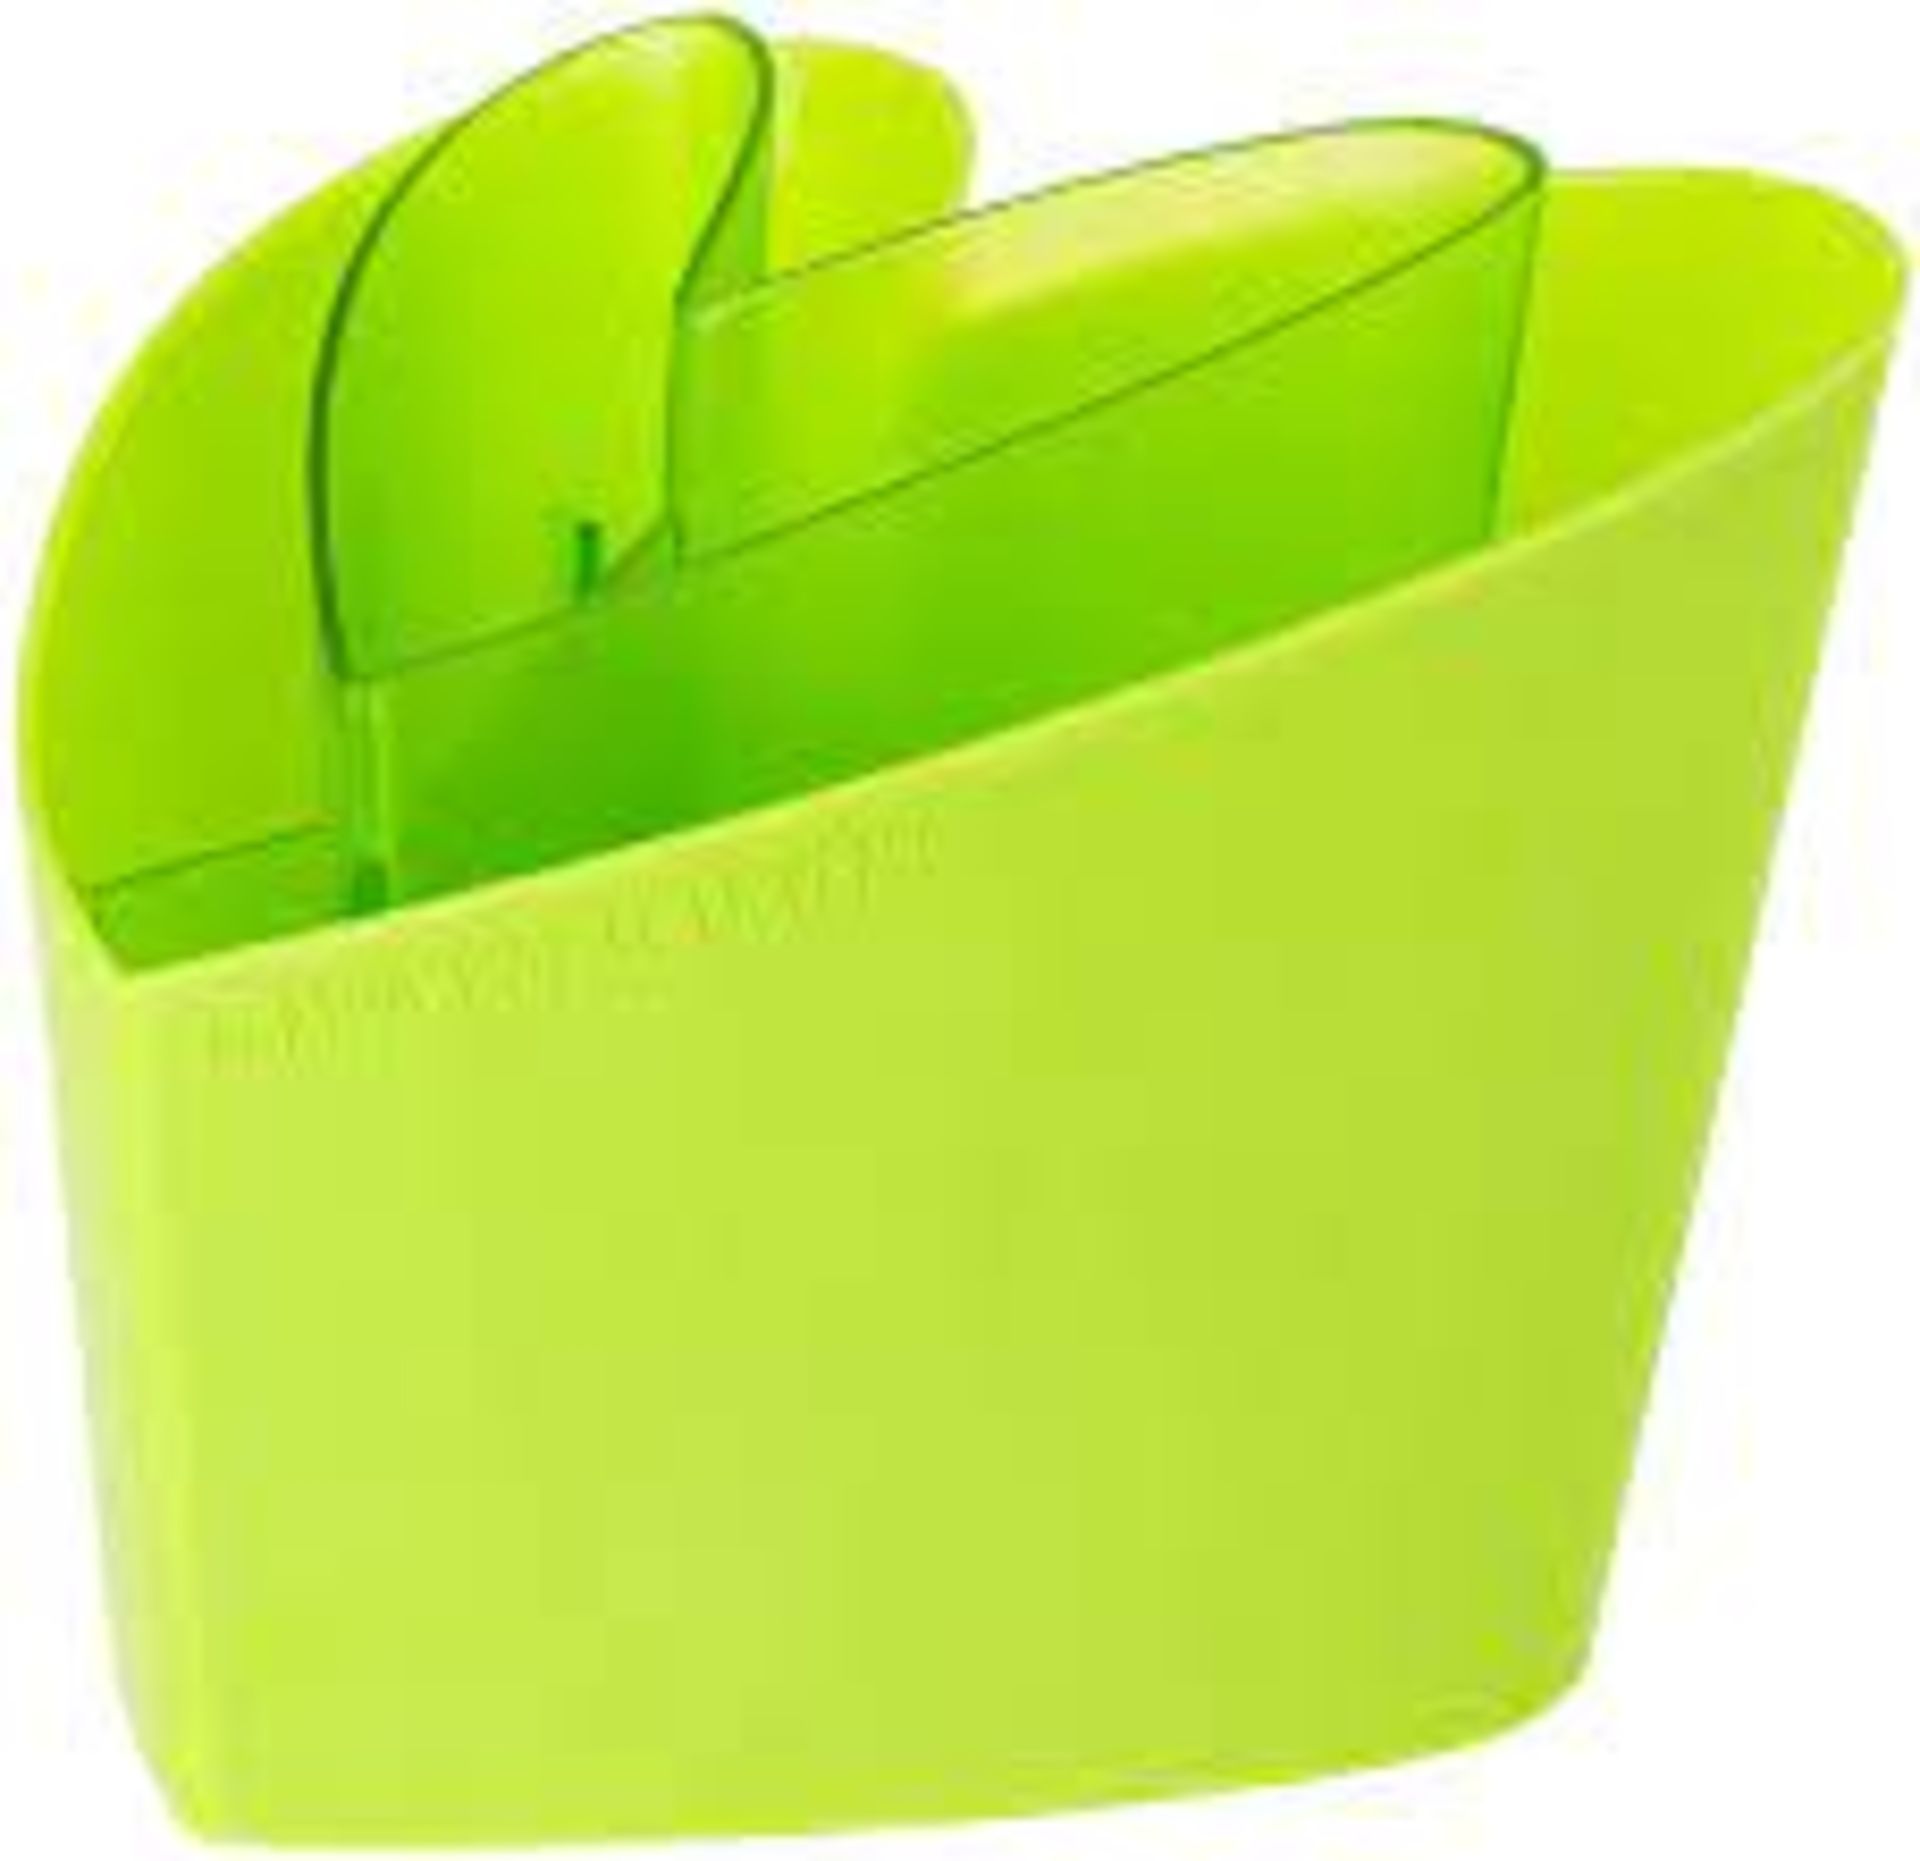 Joblot x 12 Green Brand New Original Heart-Shaped Cutlery Drainer with Removable Inner Basket - Image 2 of 2